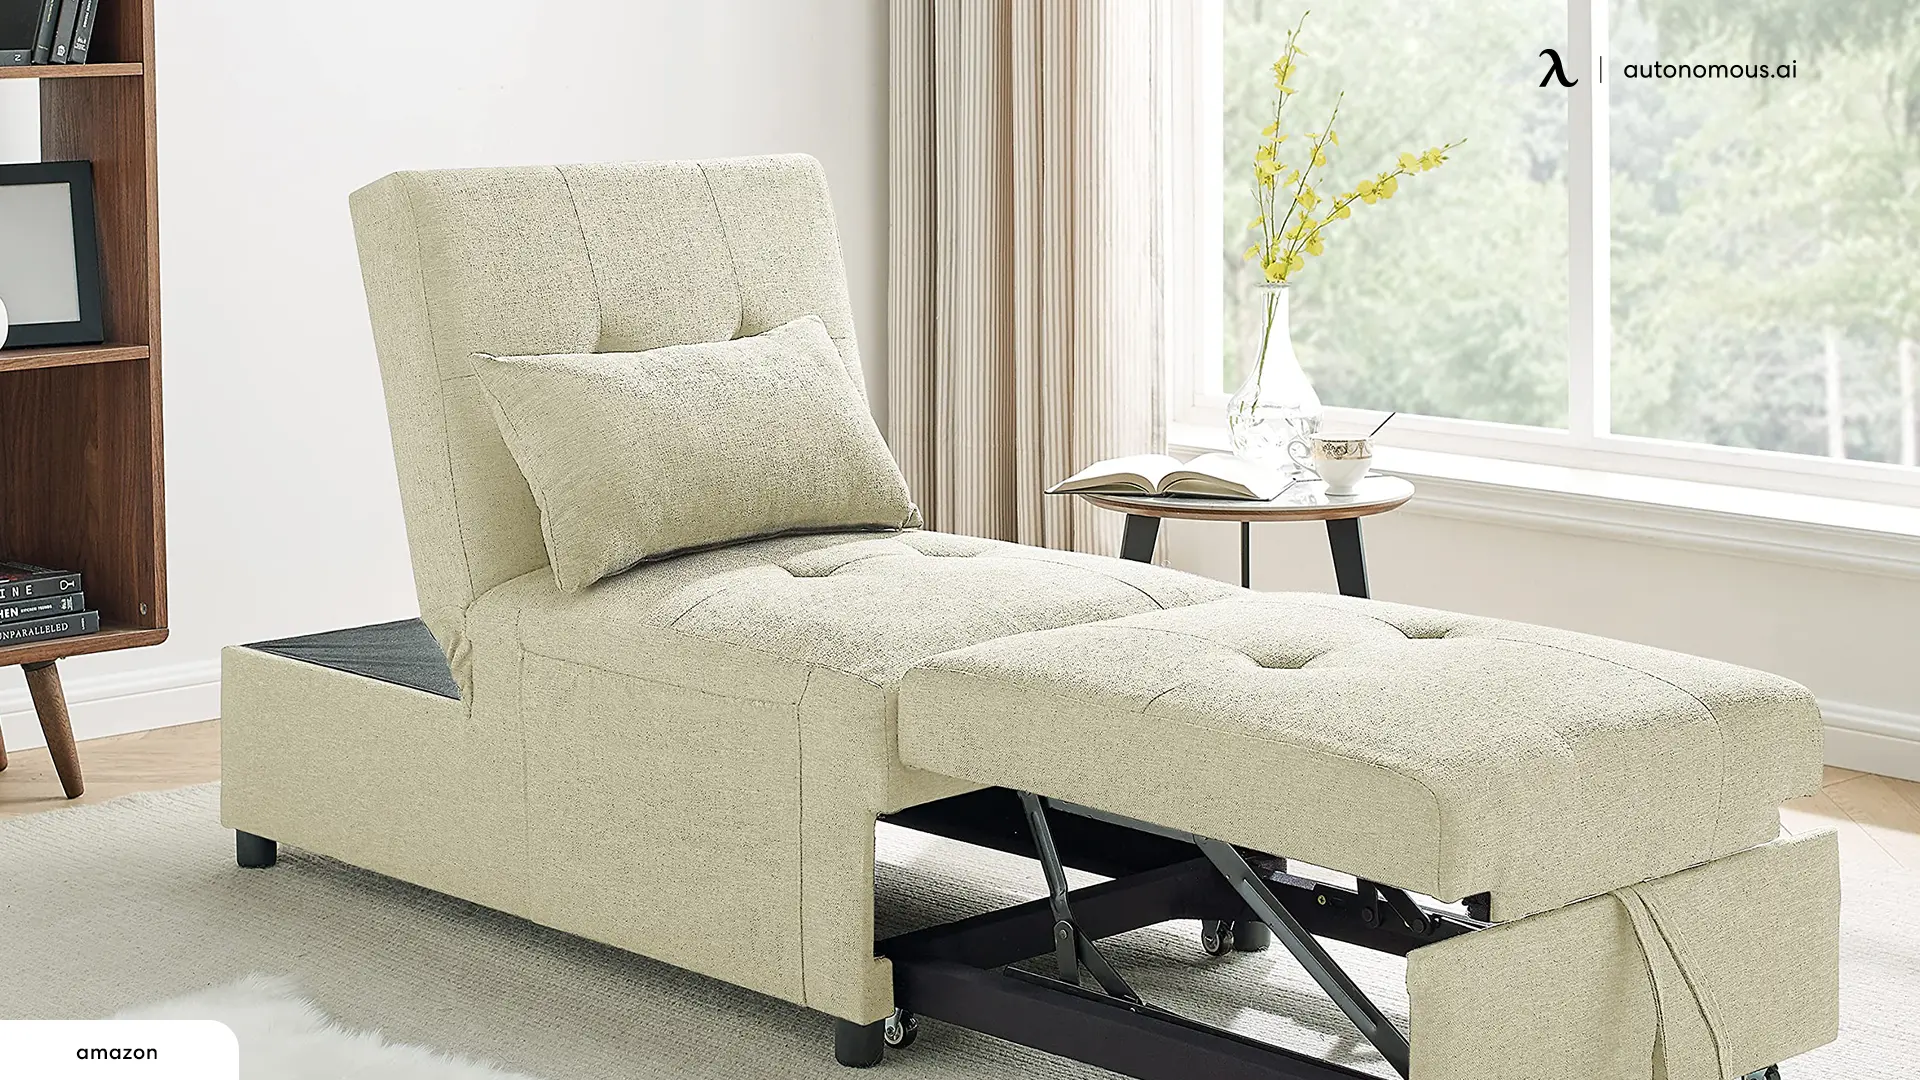 Convertible Lounge Chair Bed - guest sleeping solutions